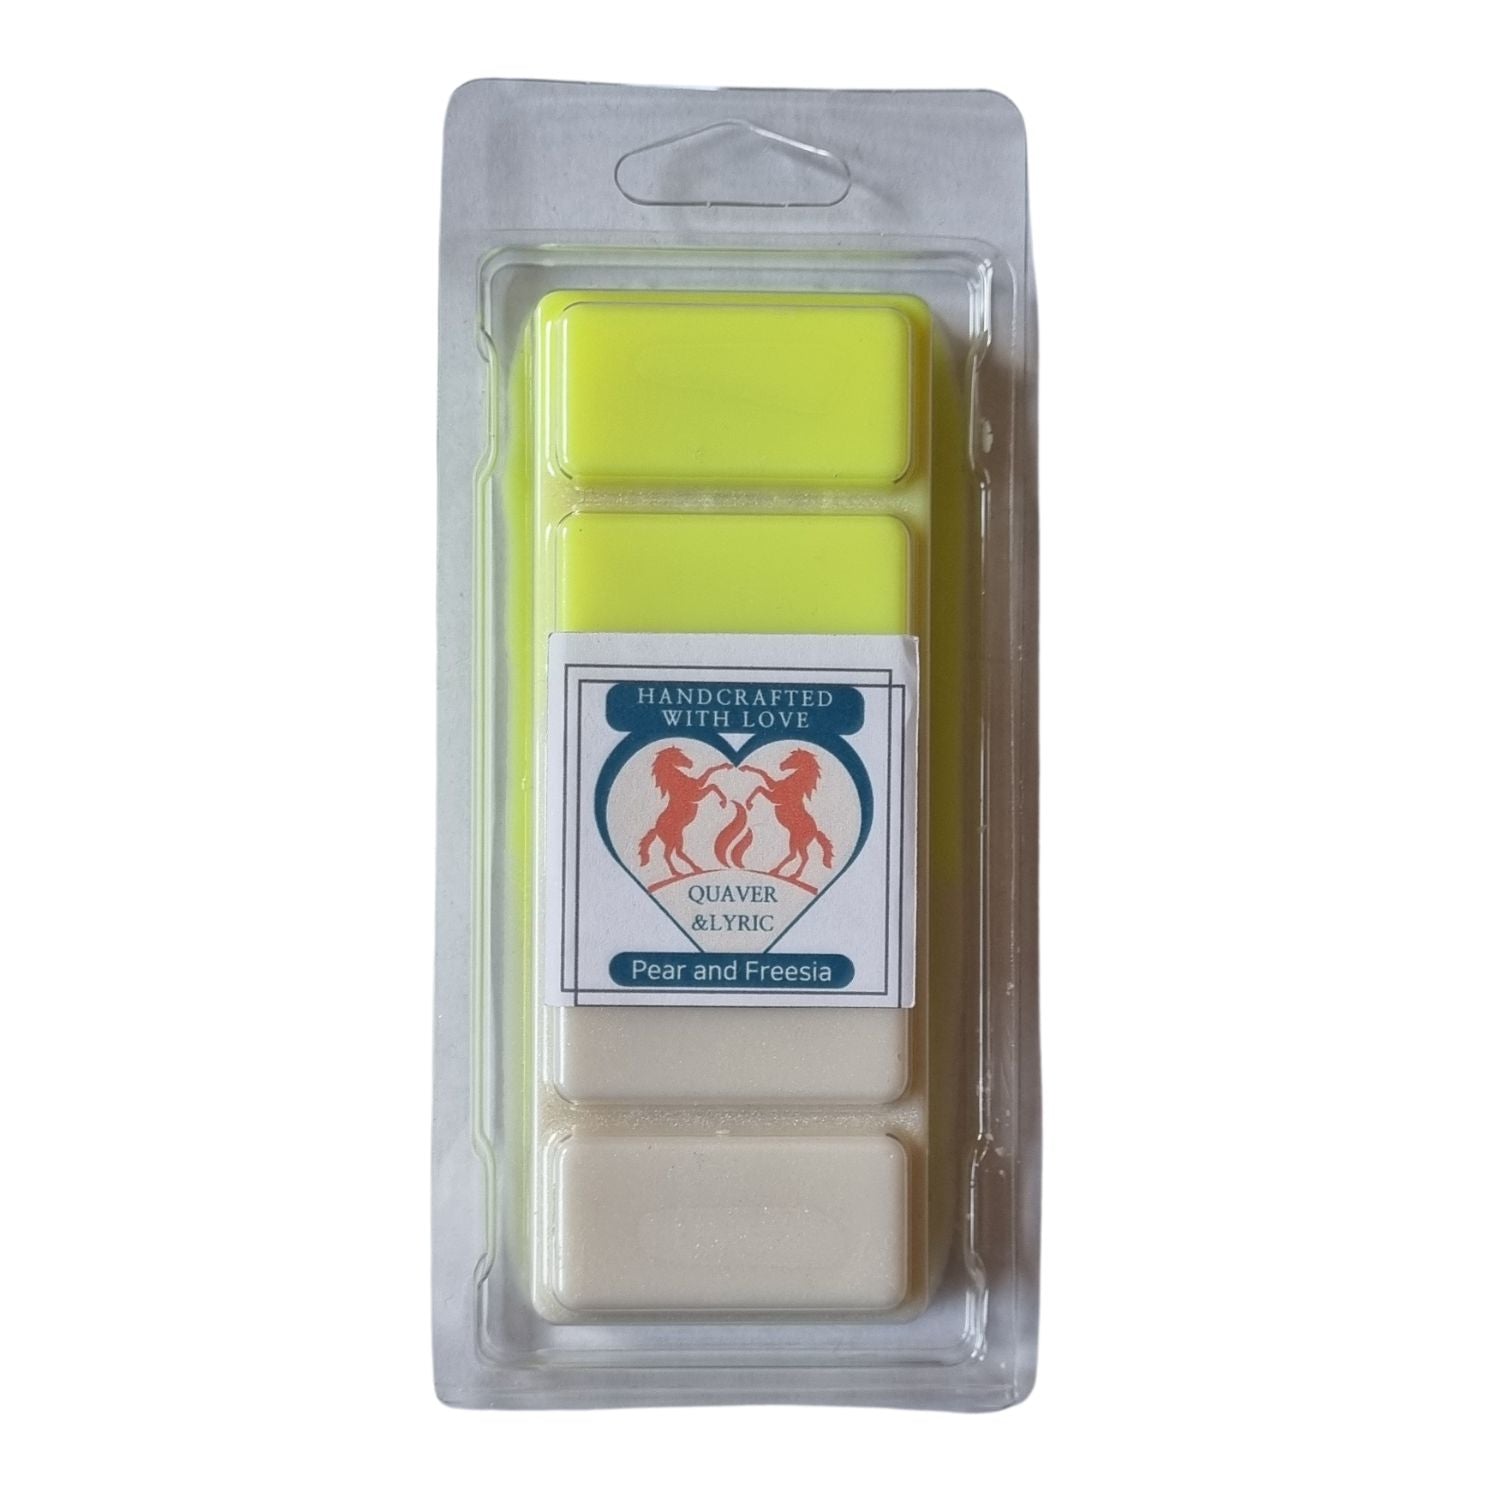  a bright yellow and white wax melt bar in a clamshell with quaver and lyric rearing horse branding